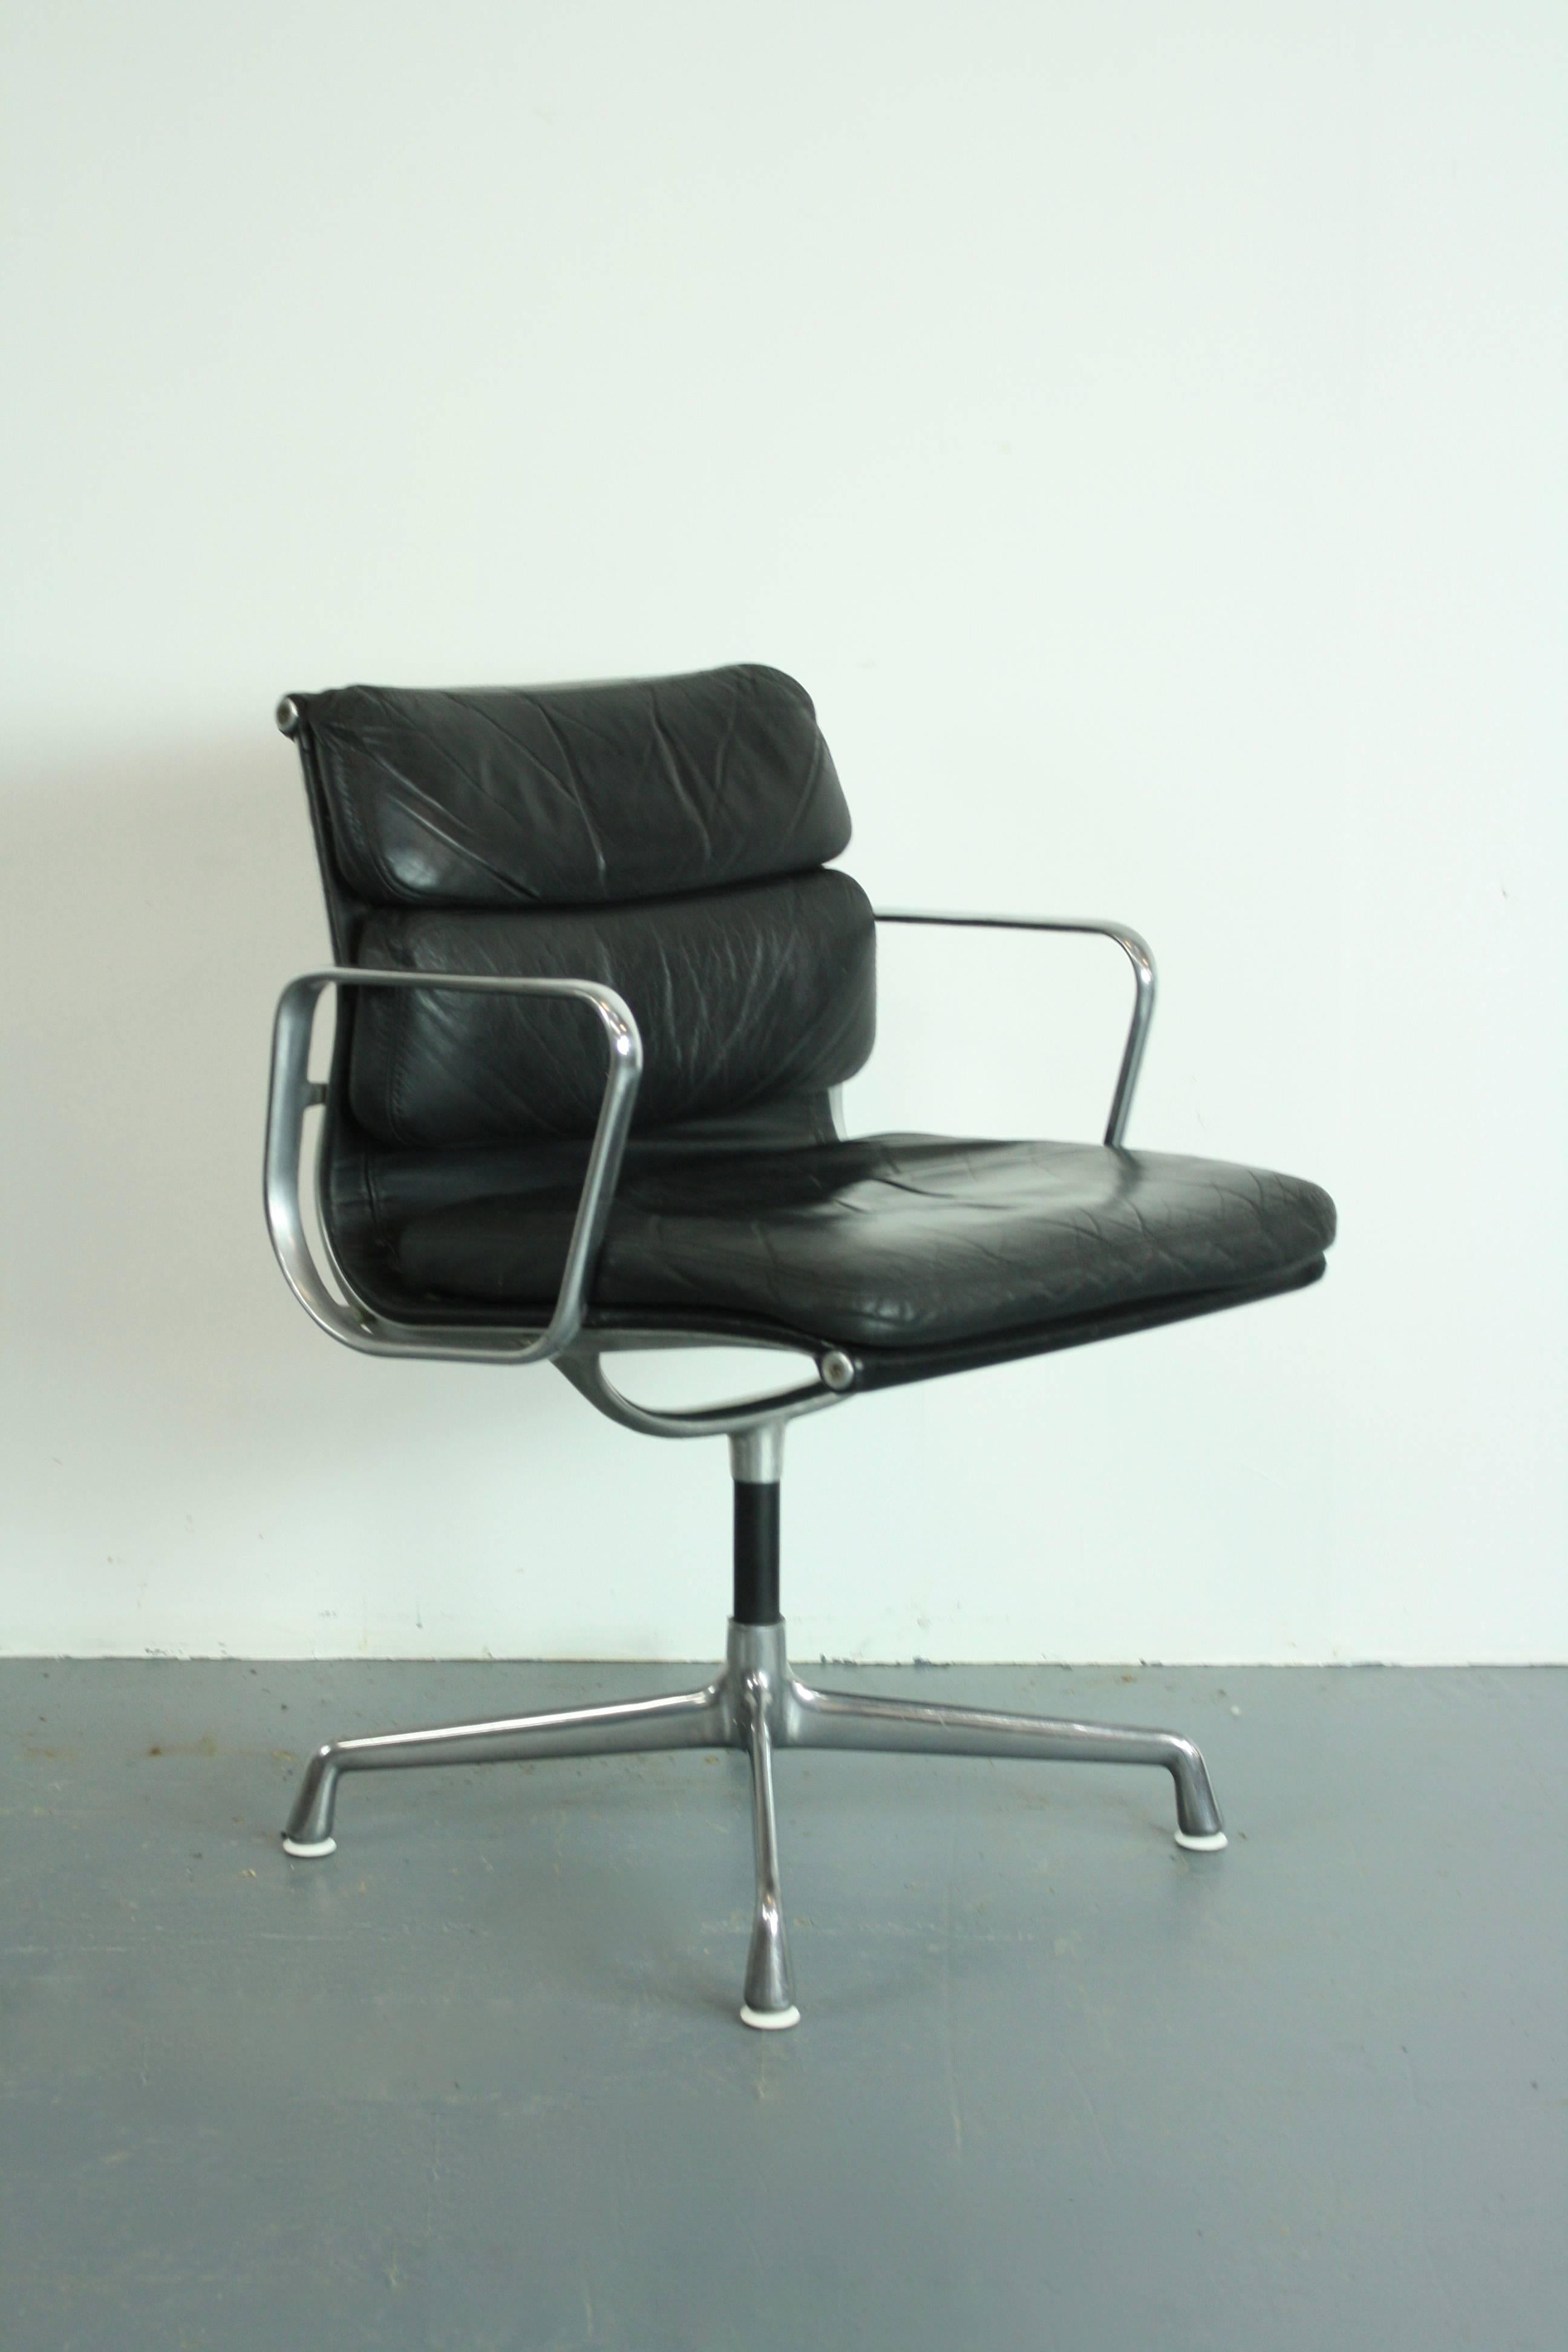 Lovely vintage black leather Soft Pad Aluminium Group chair designed by Charles and Ray Eames for Herman Miller in the 1960s. This is an early 70s model.

In good vintage condition. There is some age-related wear to the leather but nothing serious